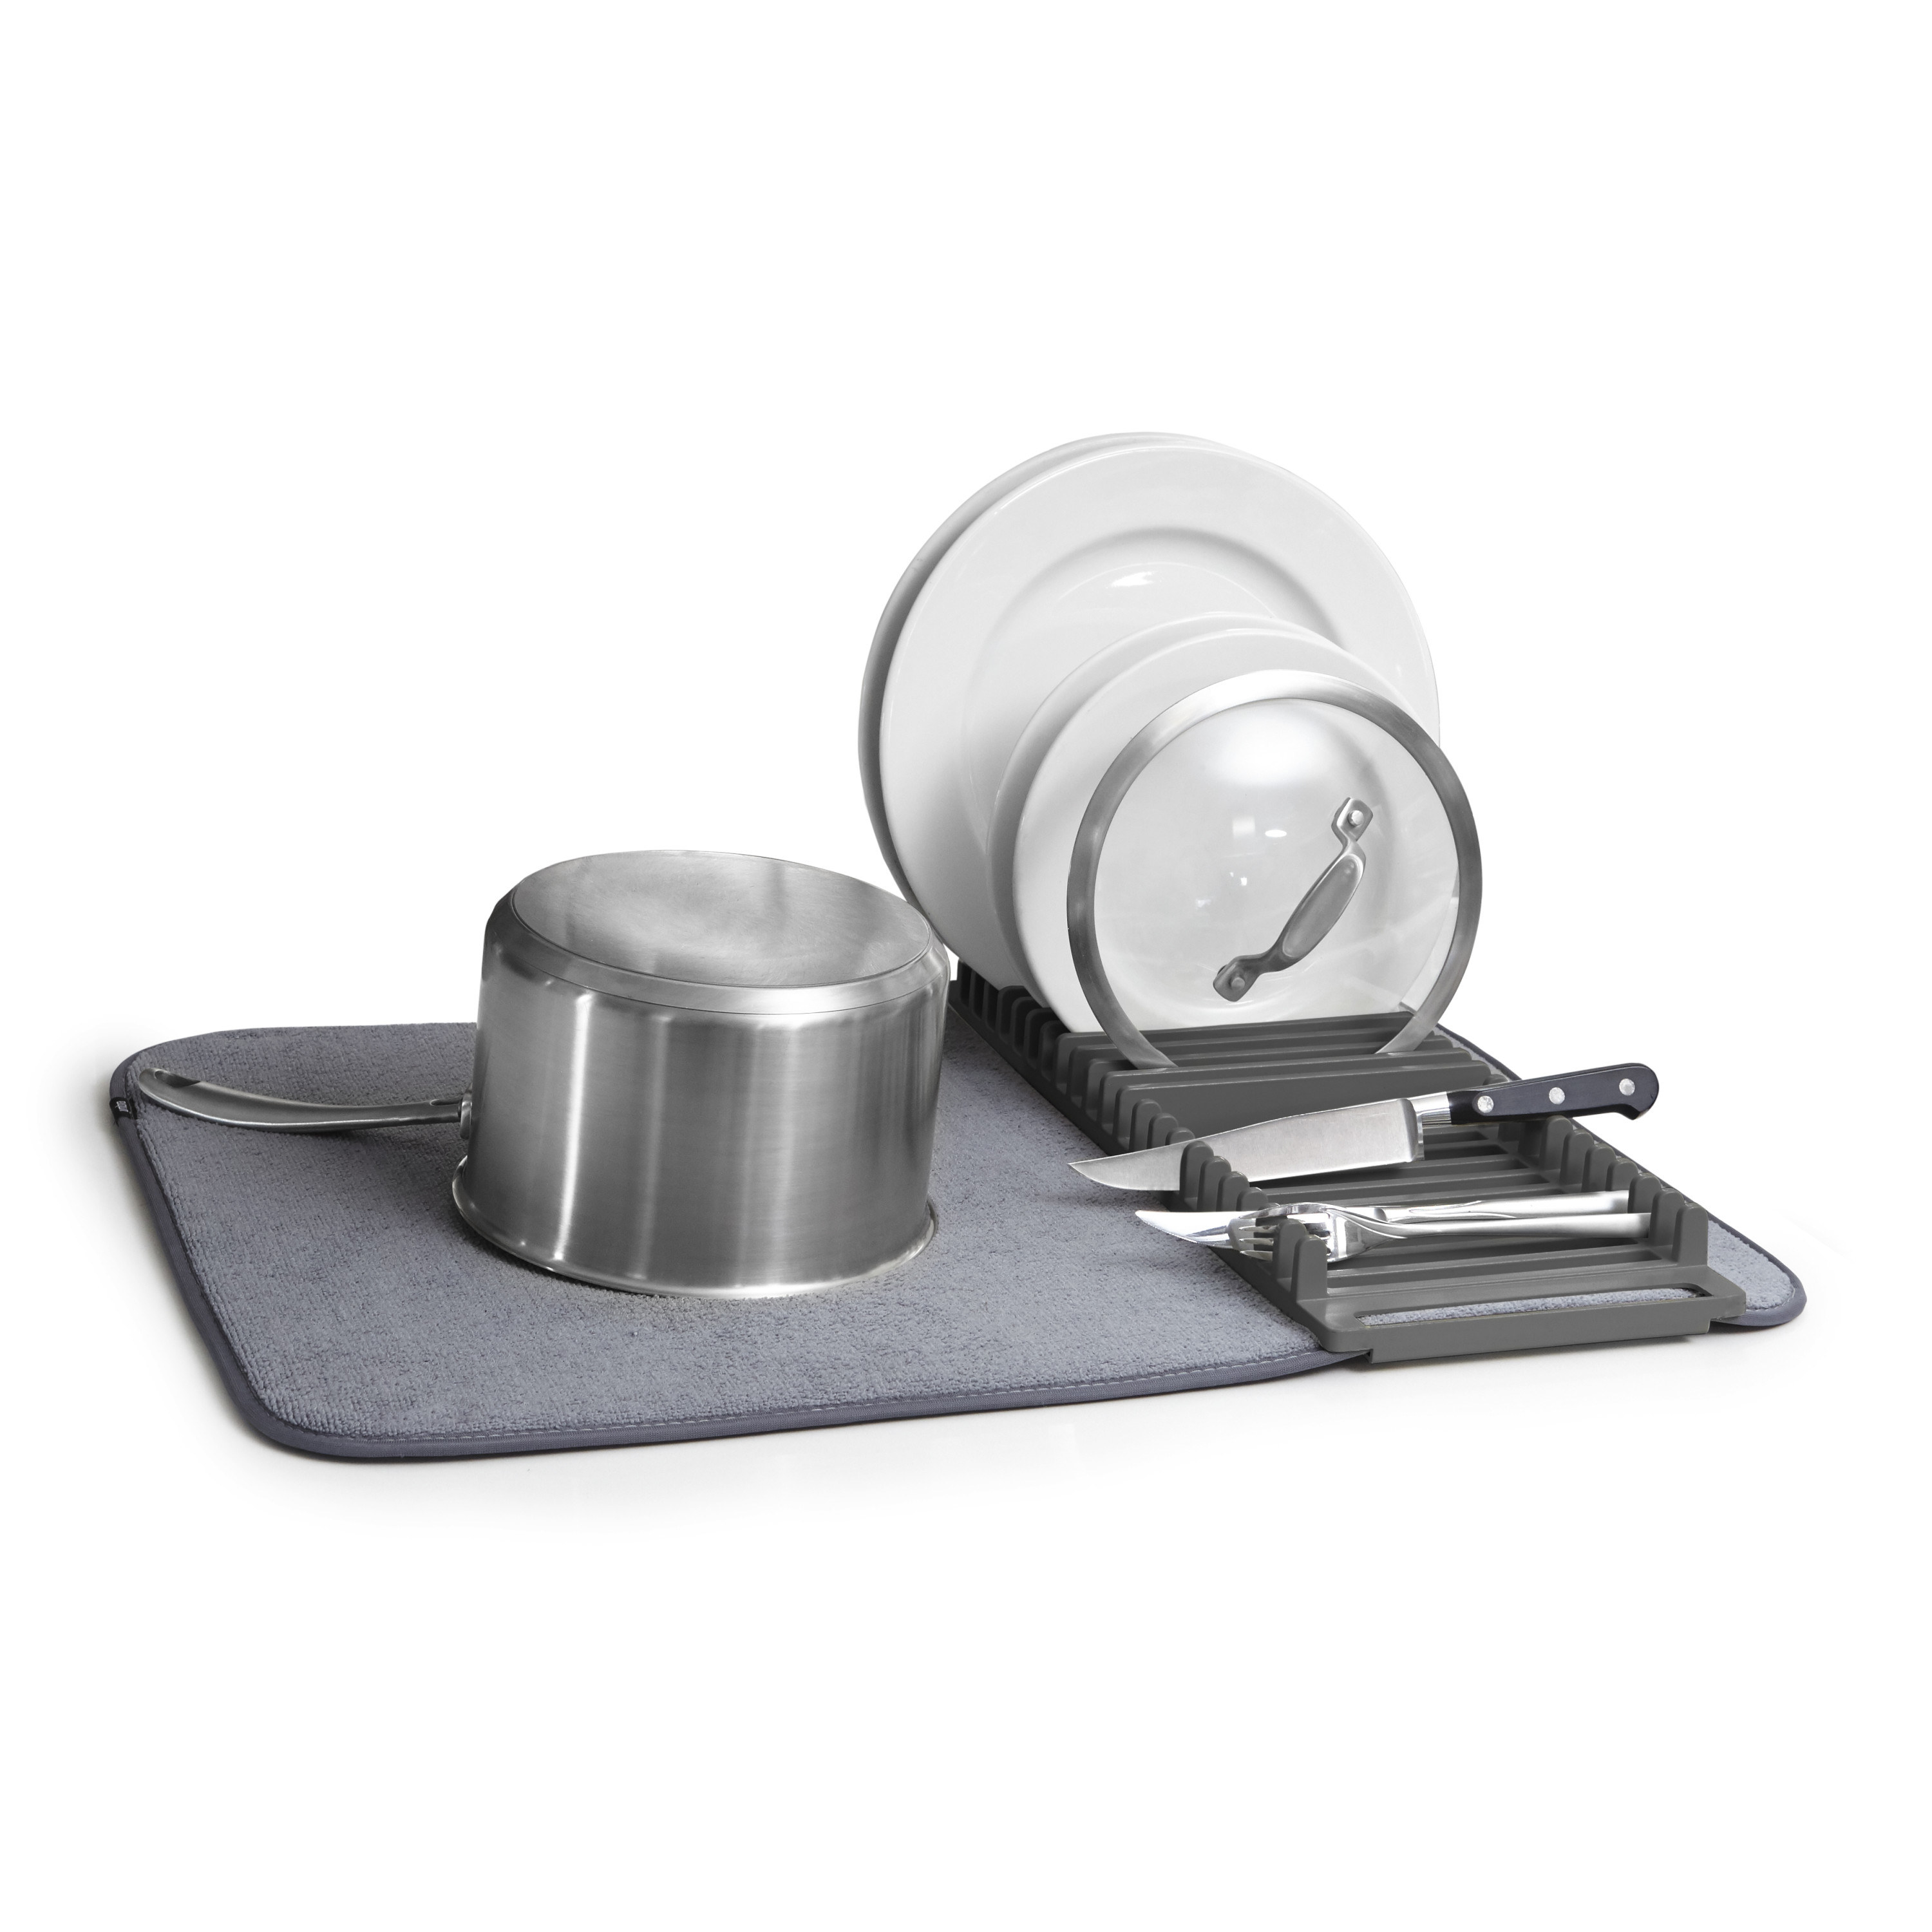 grey dish drying rack with pot, plates, and utensils on top 